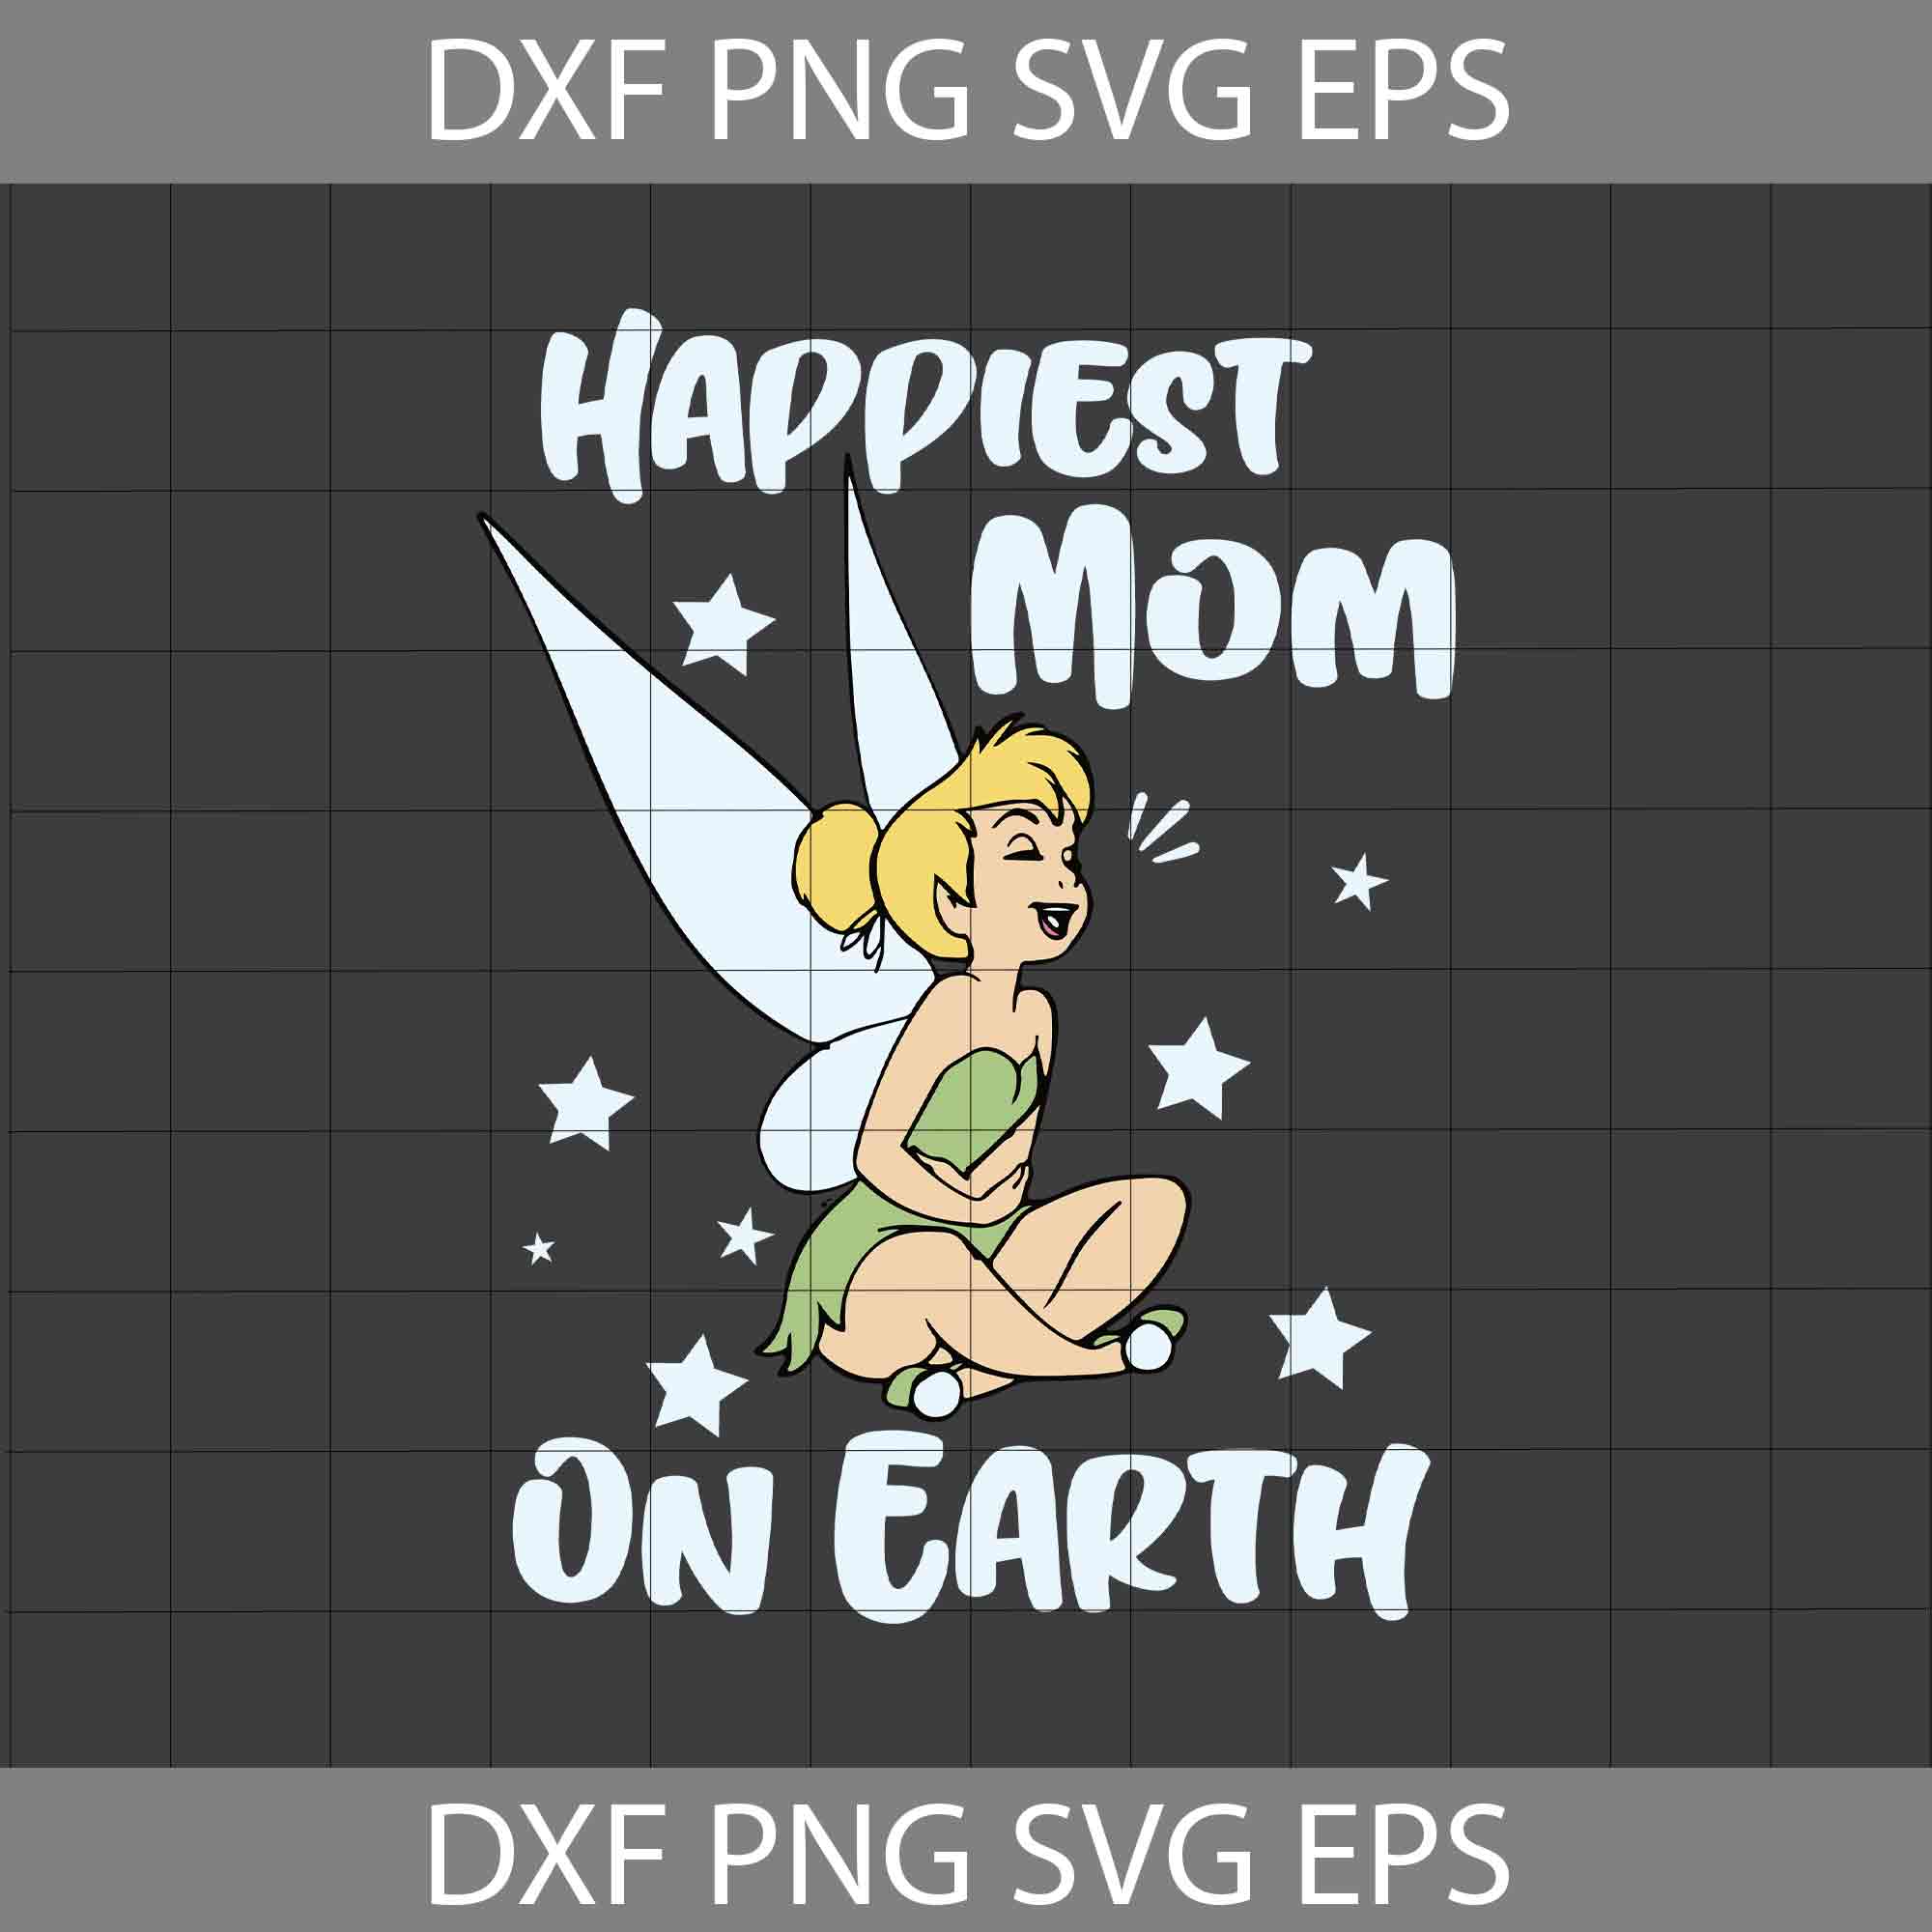 Happiest Mom On Earth Svg, Tinkerbell Svg, Mom Svg, Mother's Day Svg, Cricut File, Clipart, Svg, Png, Eps, Dxf